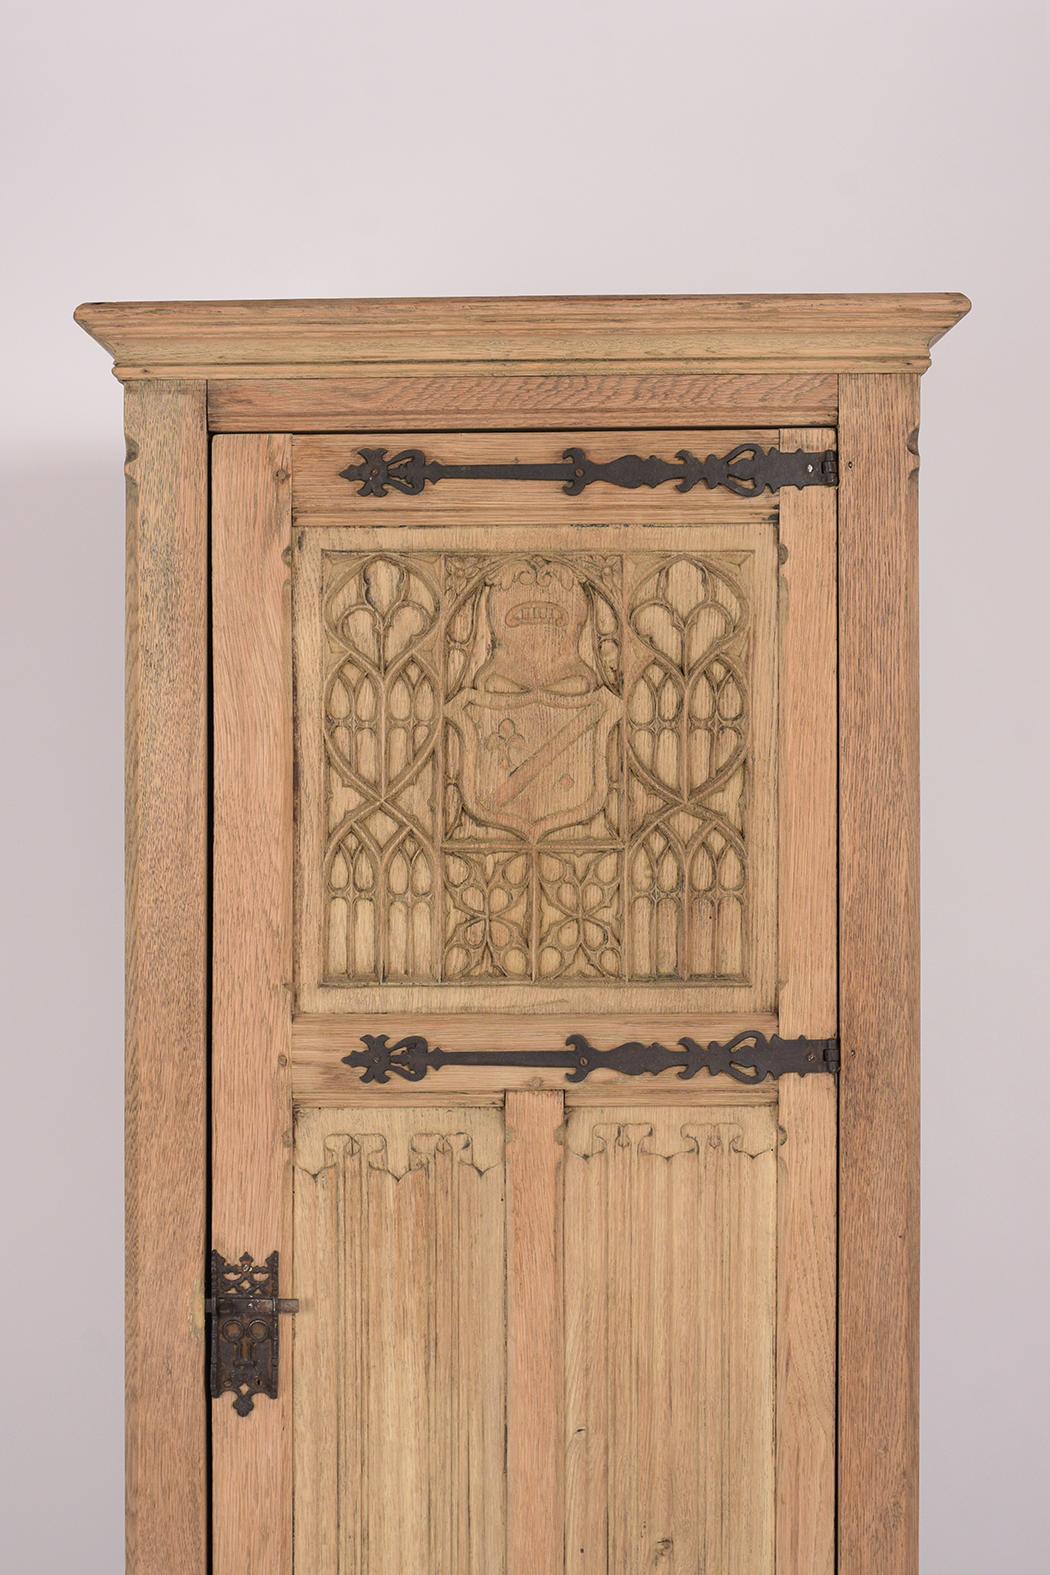 This Remarkable French 19th century armoire is in good condition, made out of solid oakwood, and features a newly bleached wood finish. The piece comes with a single door with hand carved panels, the top panel has an elegantly carved shield design,